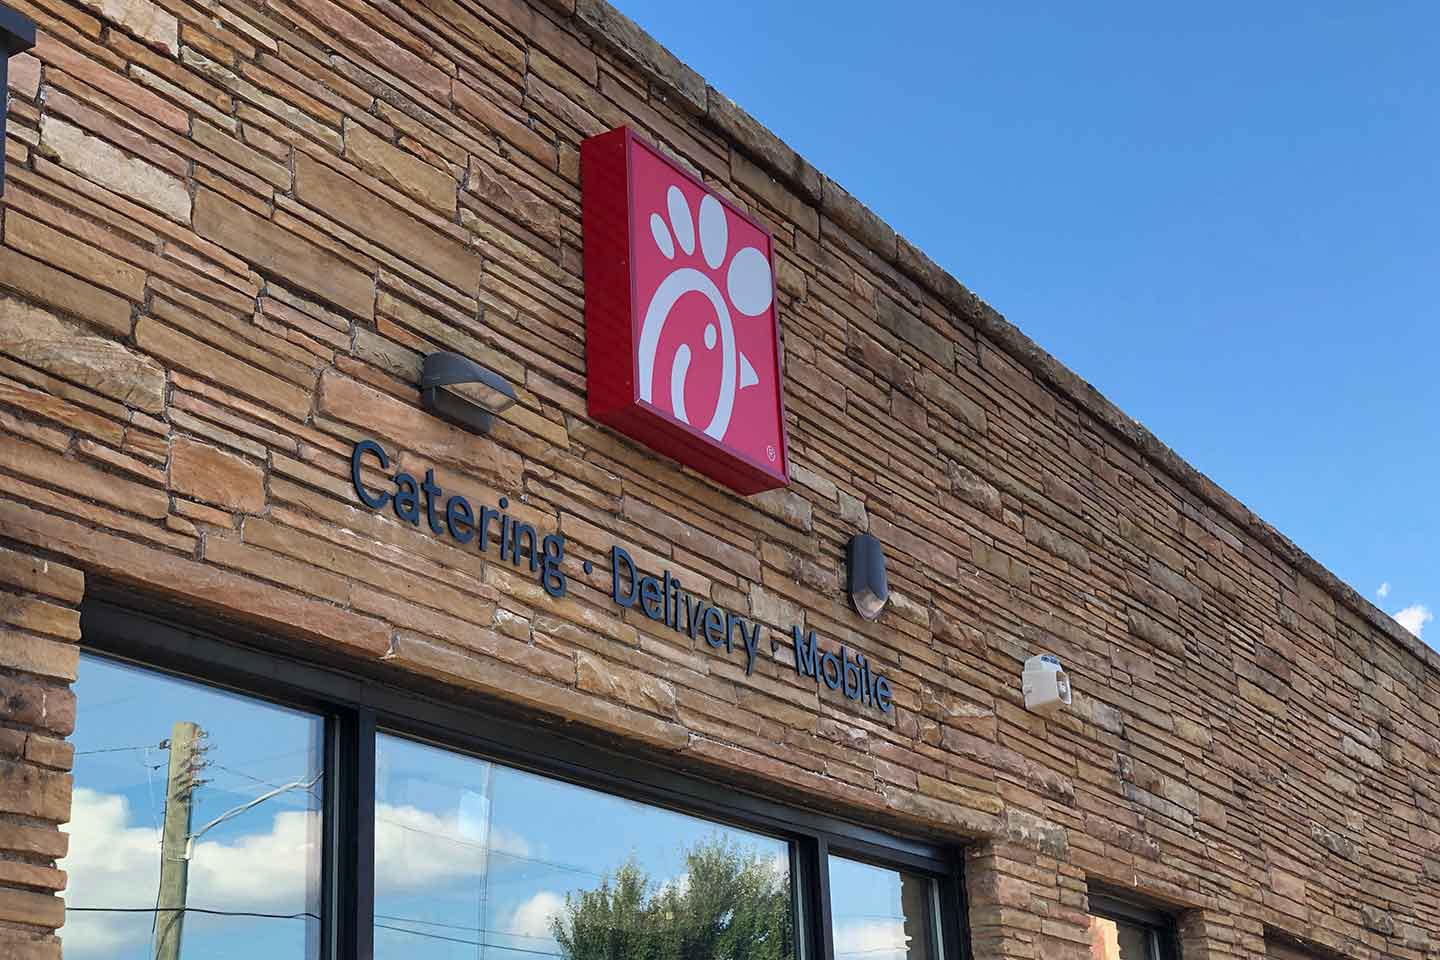 ChickfilA to open new restaurant prototype in Nashville and